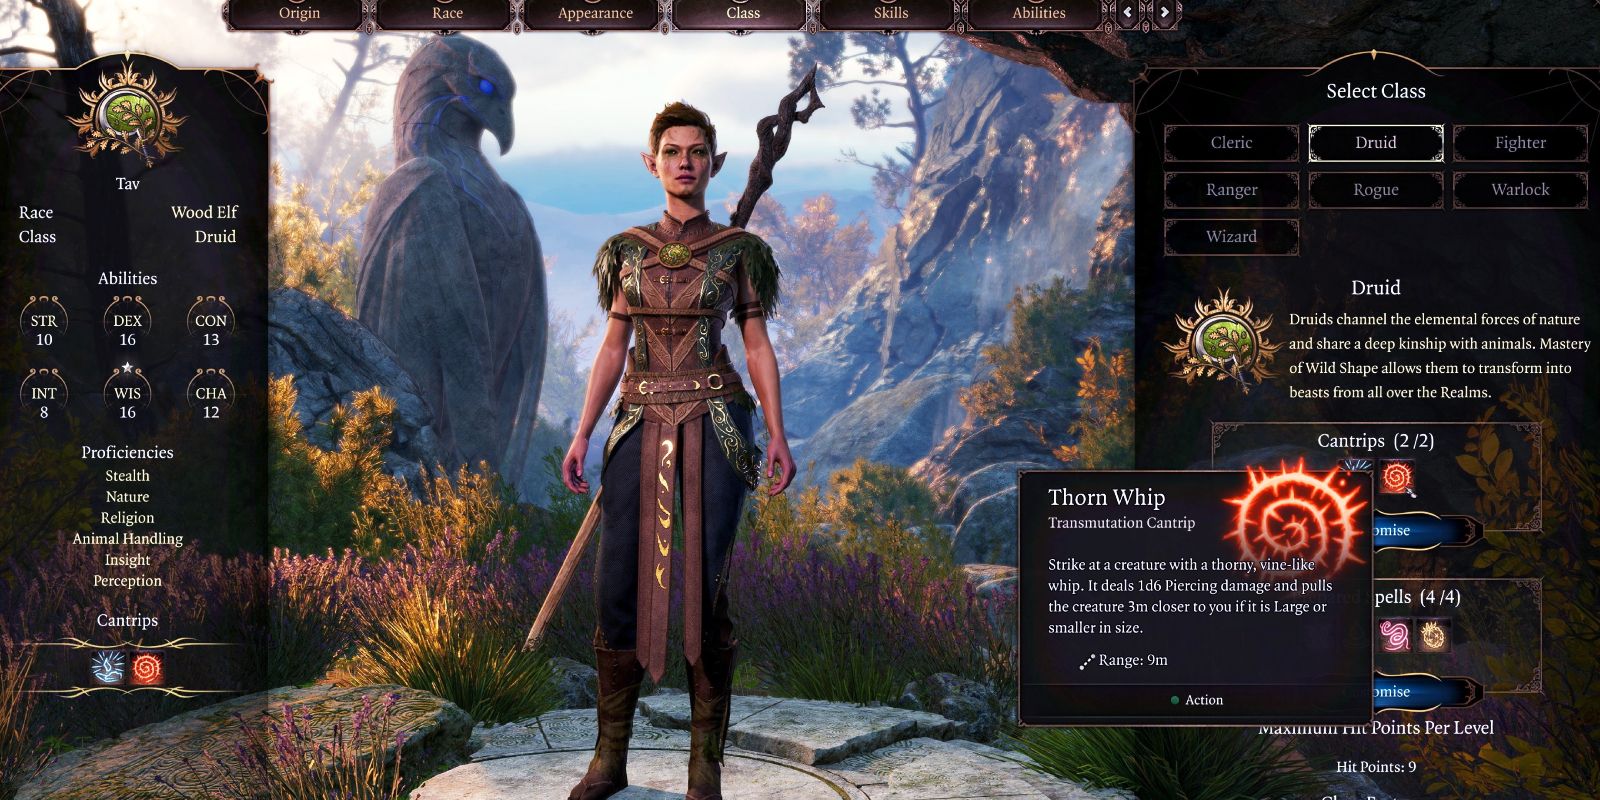 Why Character Customization In RPGs Is Becoming More Common Baldur’s Gate